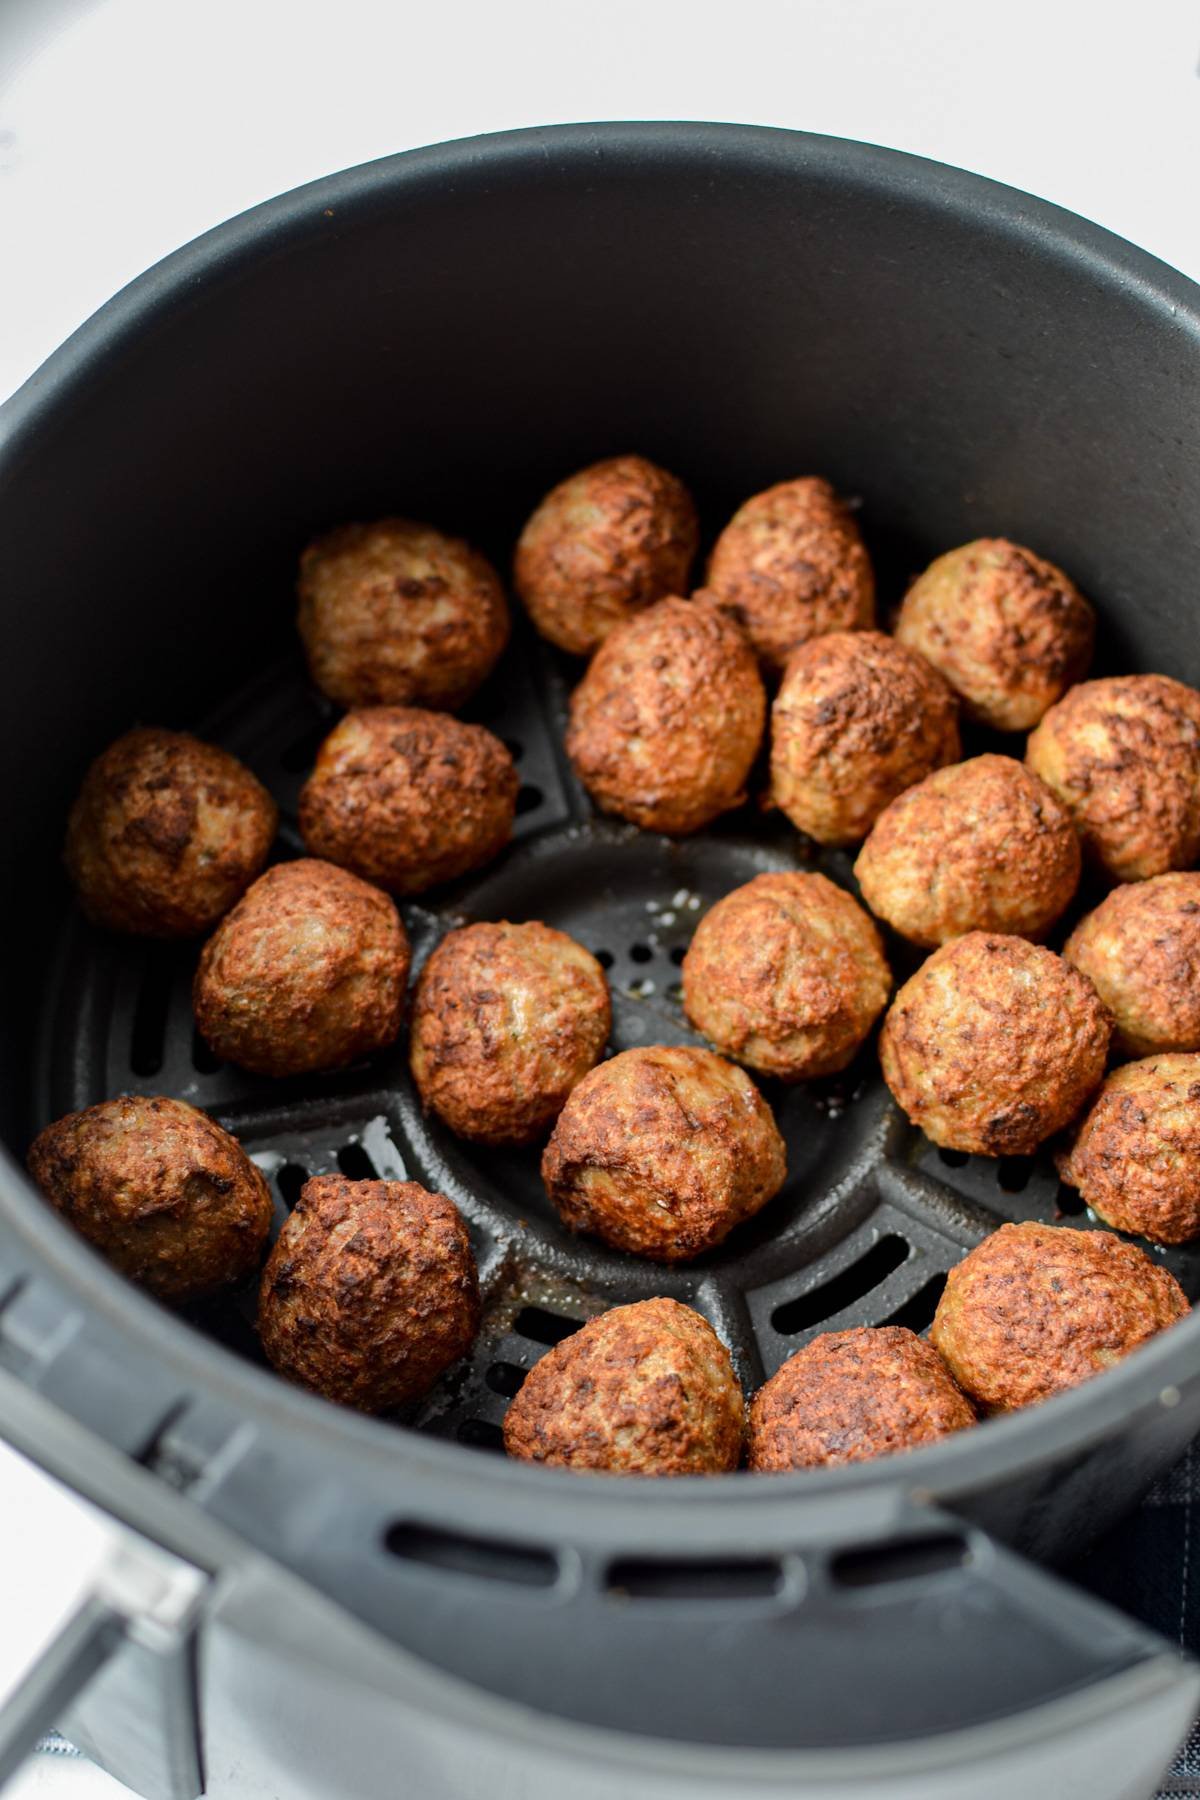 An air fryer basket filled with cooked meatballs.